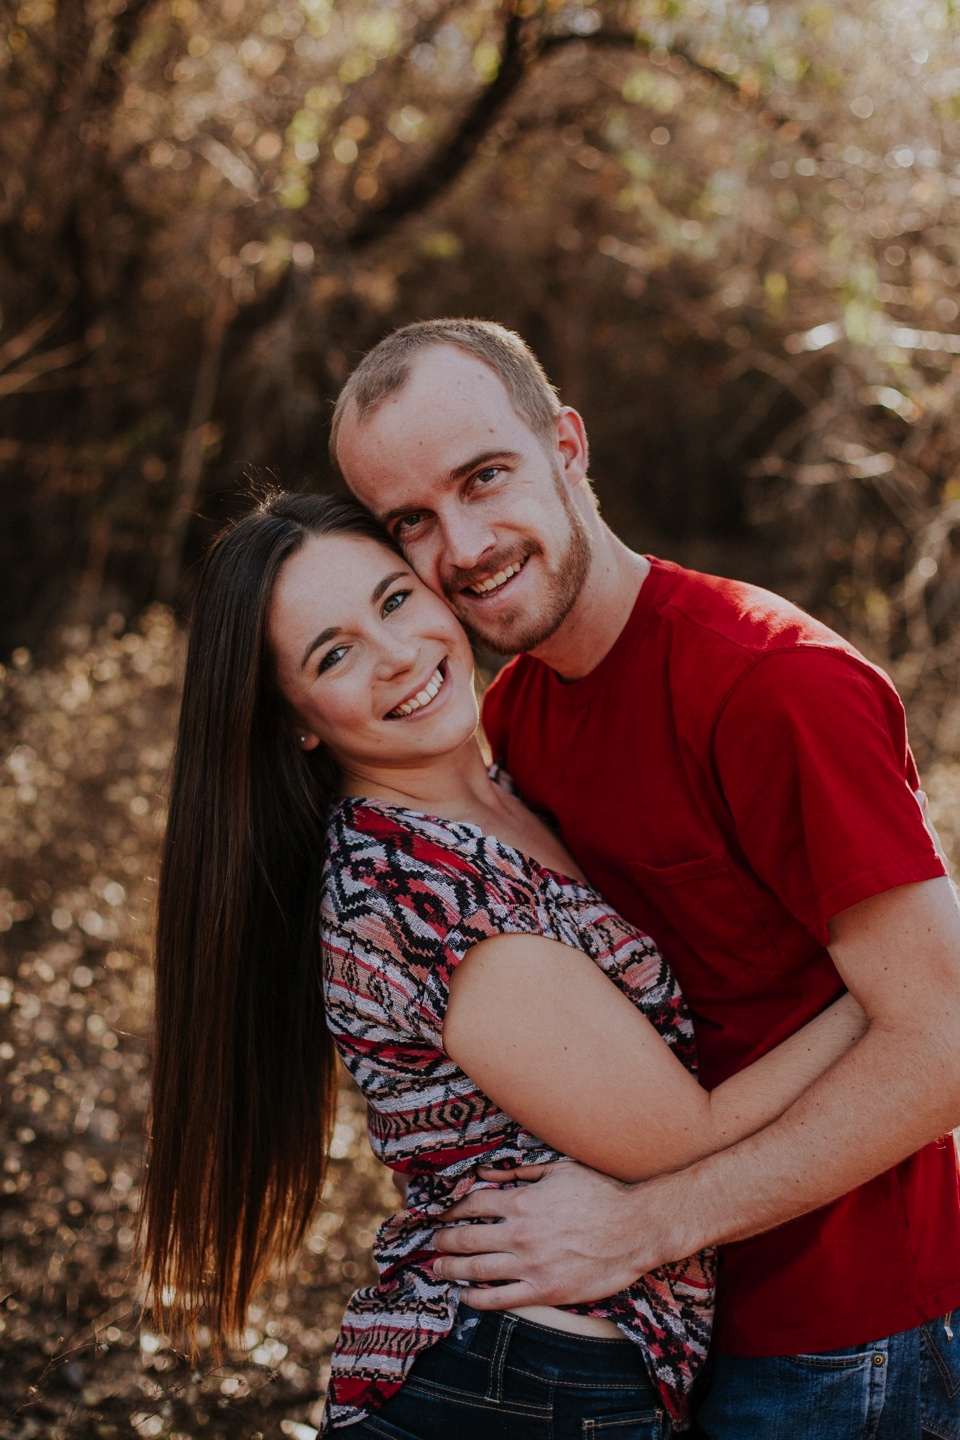  We met up again in Albuquerque, New Mexico and ventured to the Albuquerque bosque to take some fall inspired engagement photos. I loved the warm color palette they chose for their attire for this part of the session! We also had to take some cute en